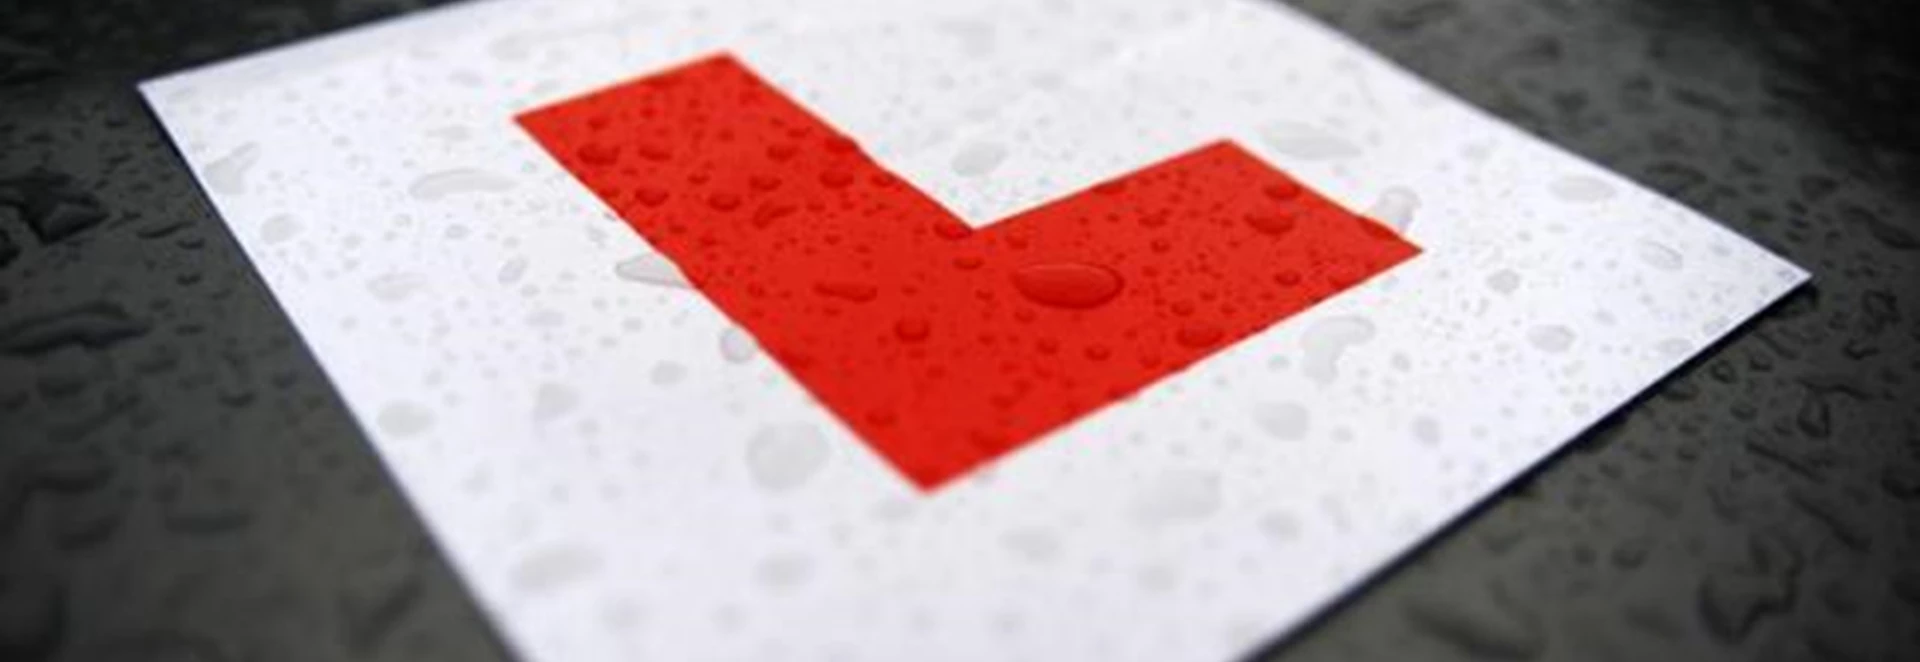 Driving test passes 80th anniversary 